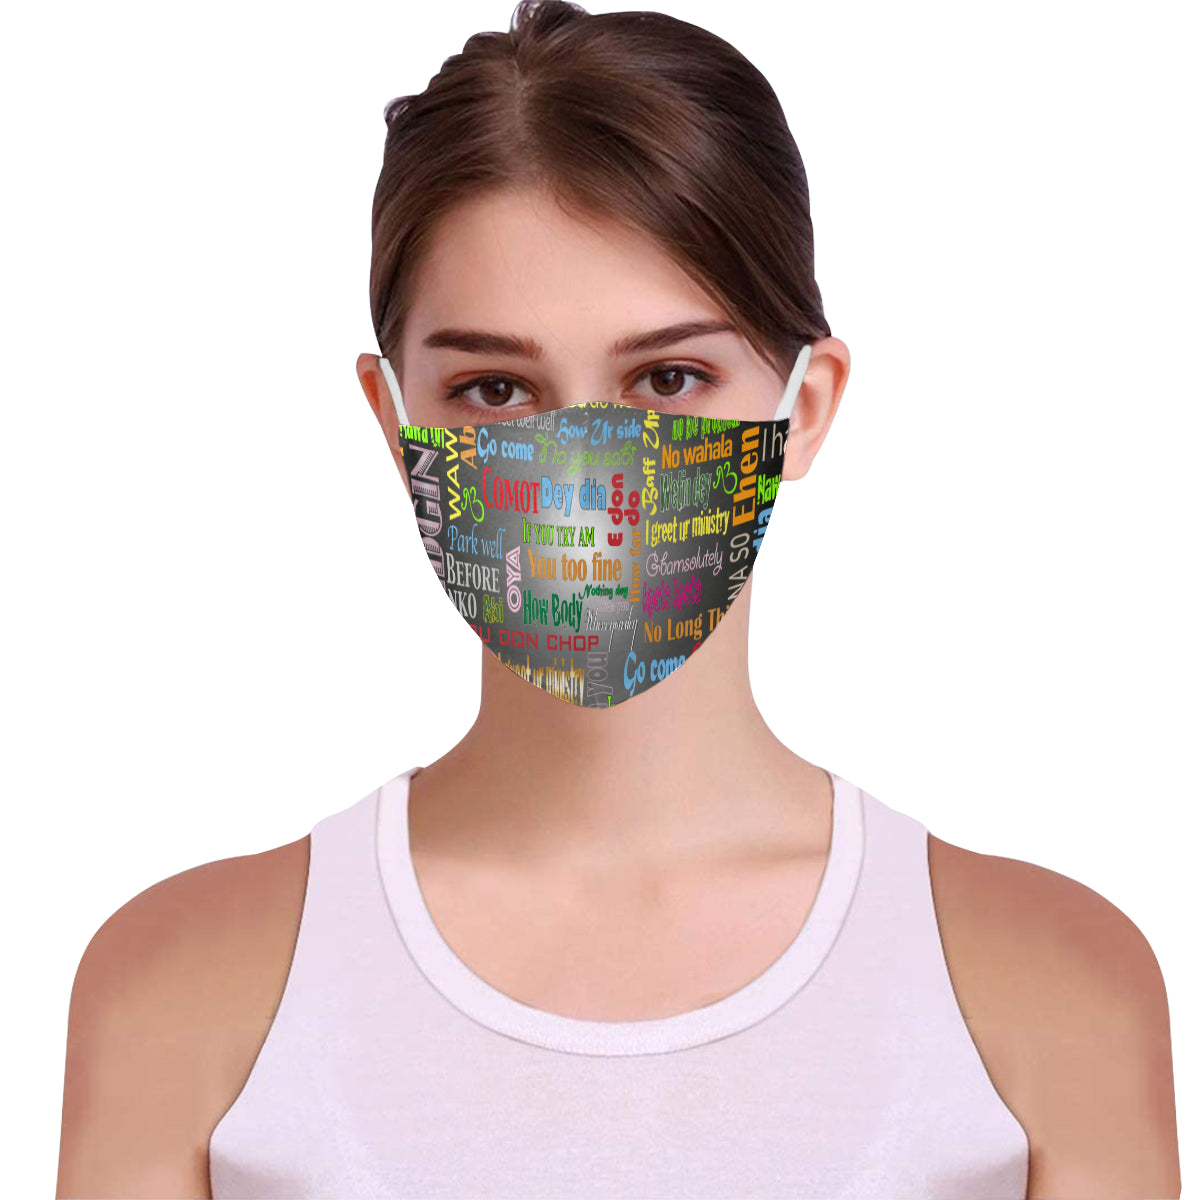 flyersetcinc Pidgin Print Galaxy Cotton Fabric Face Mask with Filter Slot & Adjustable Strap (Pack of 5) - Non-medical use